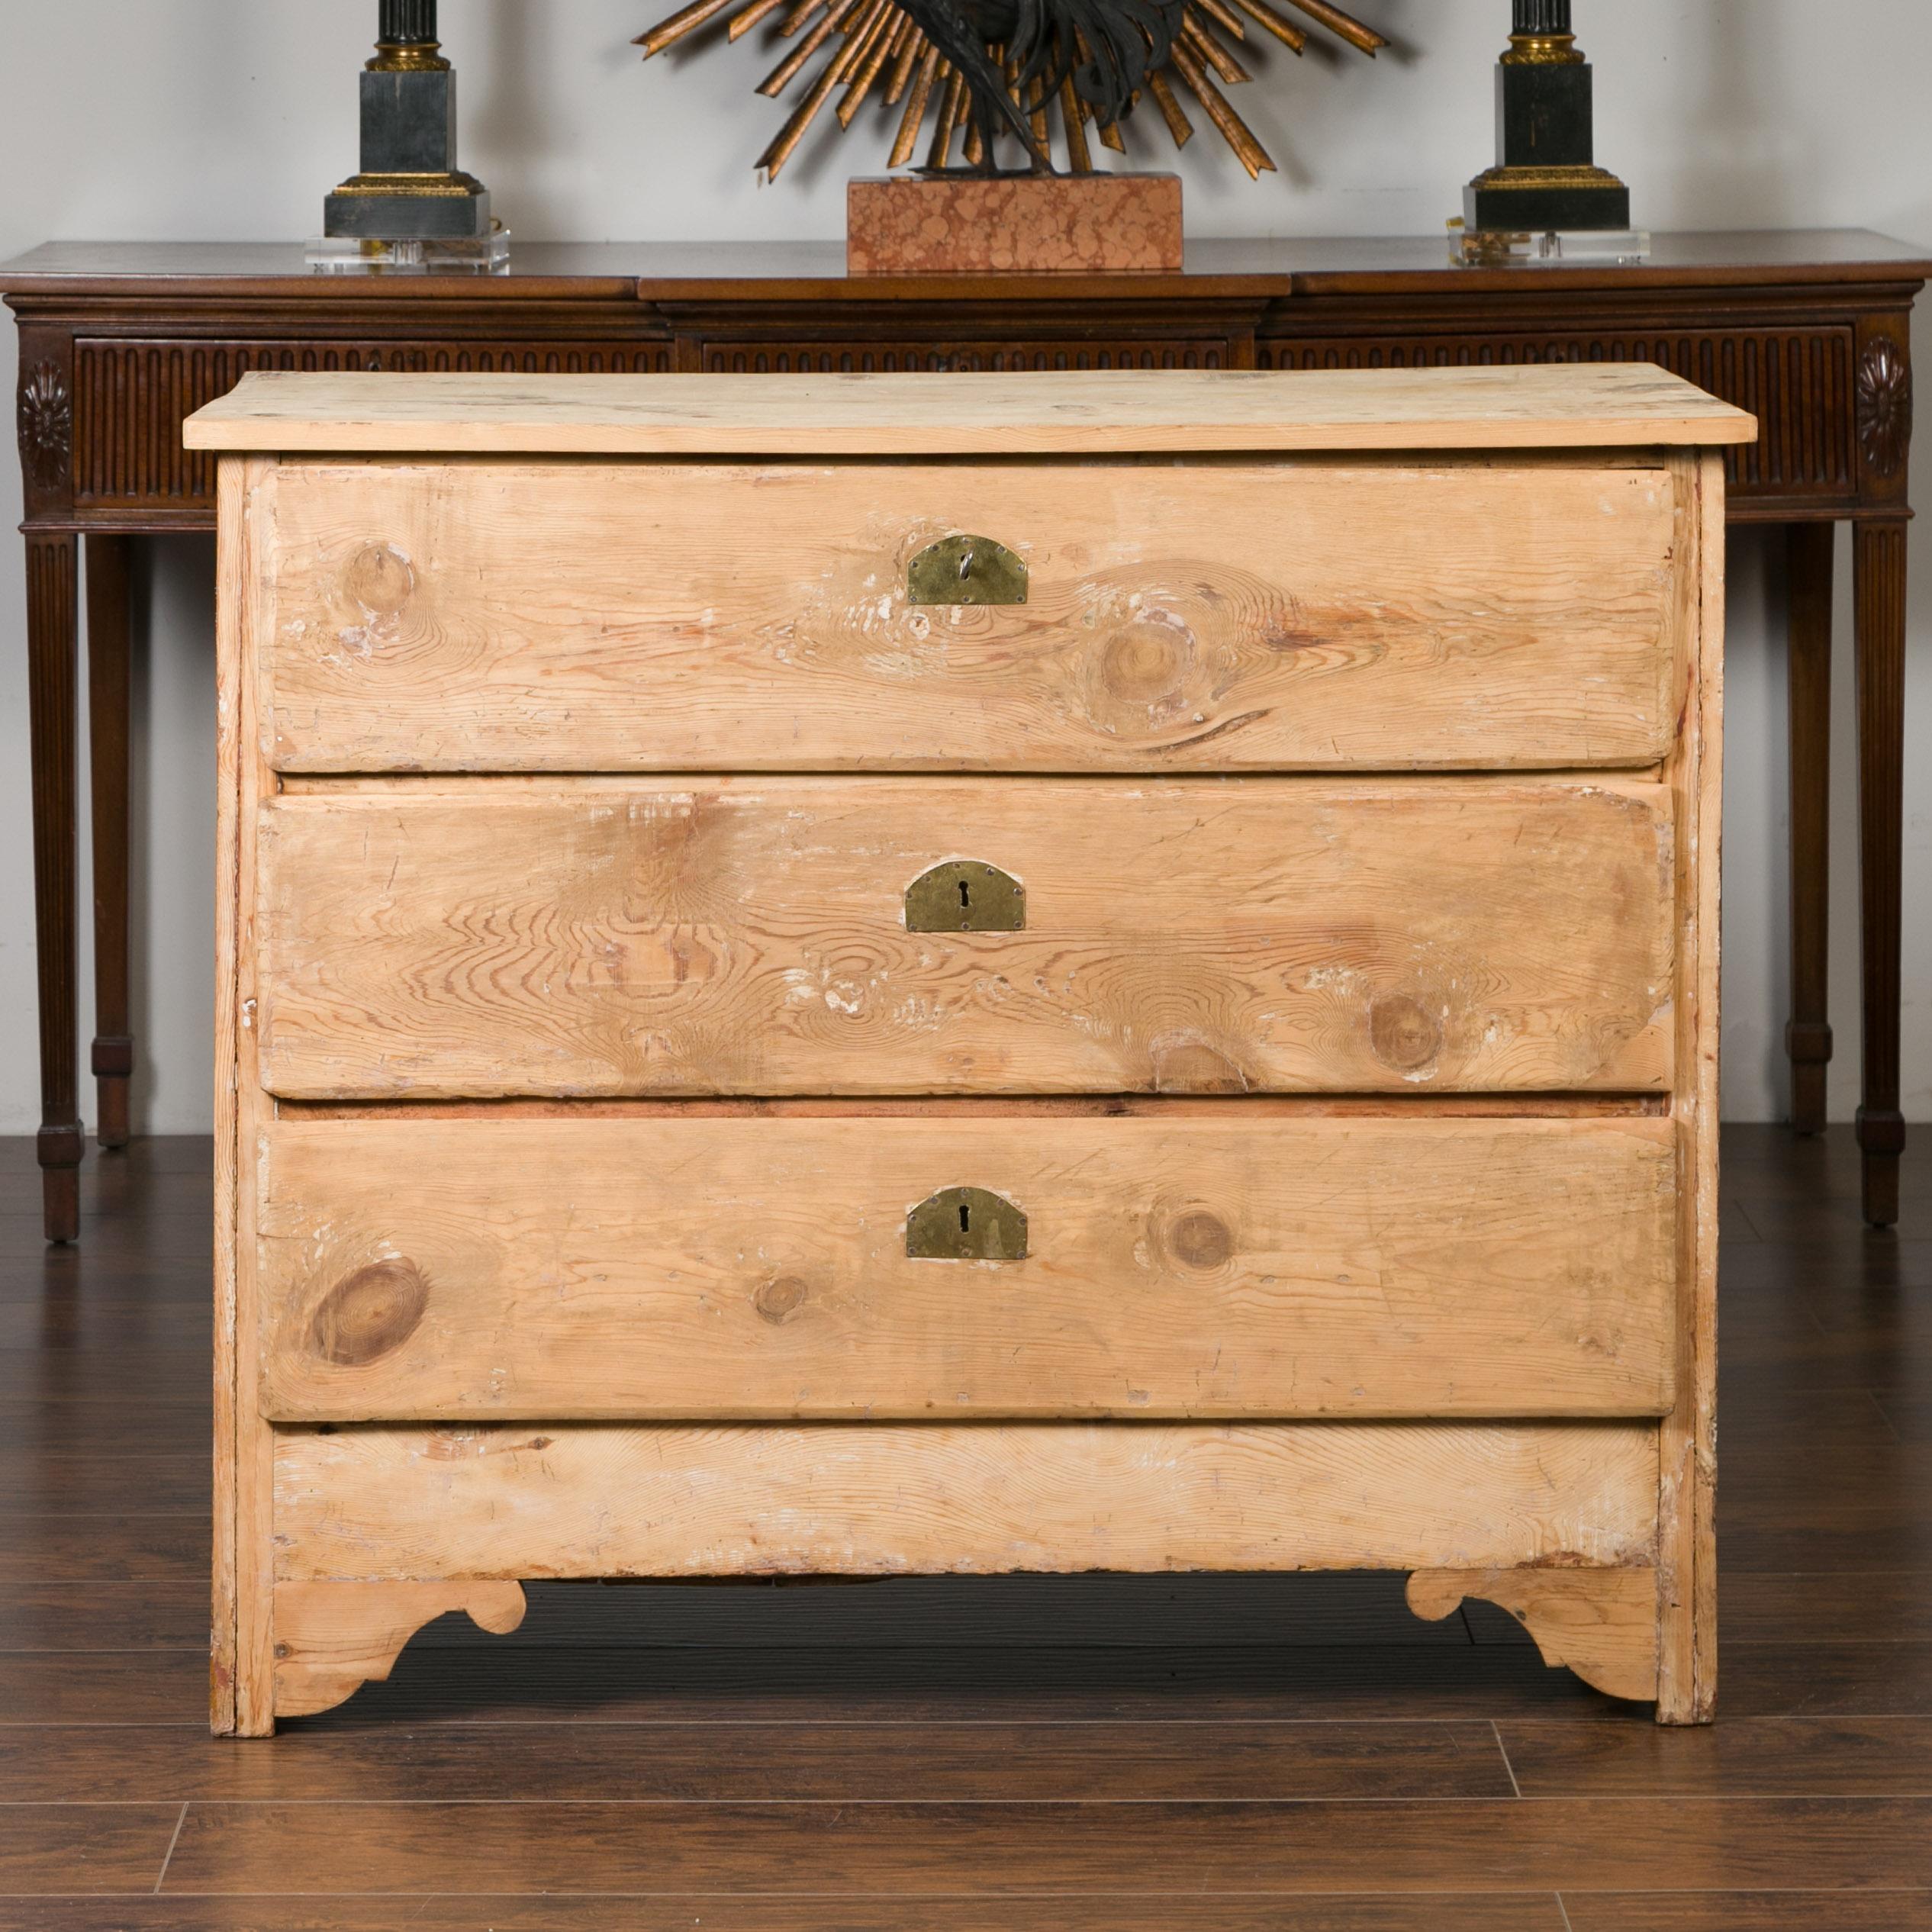 A French bleached pine three-drawer commode from the late 19th century, with carved spandrels. Created in France during the 19th century, this newly bleached chest features a rectangular planked top sitting above three drawers fitted with brass